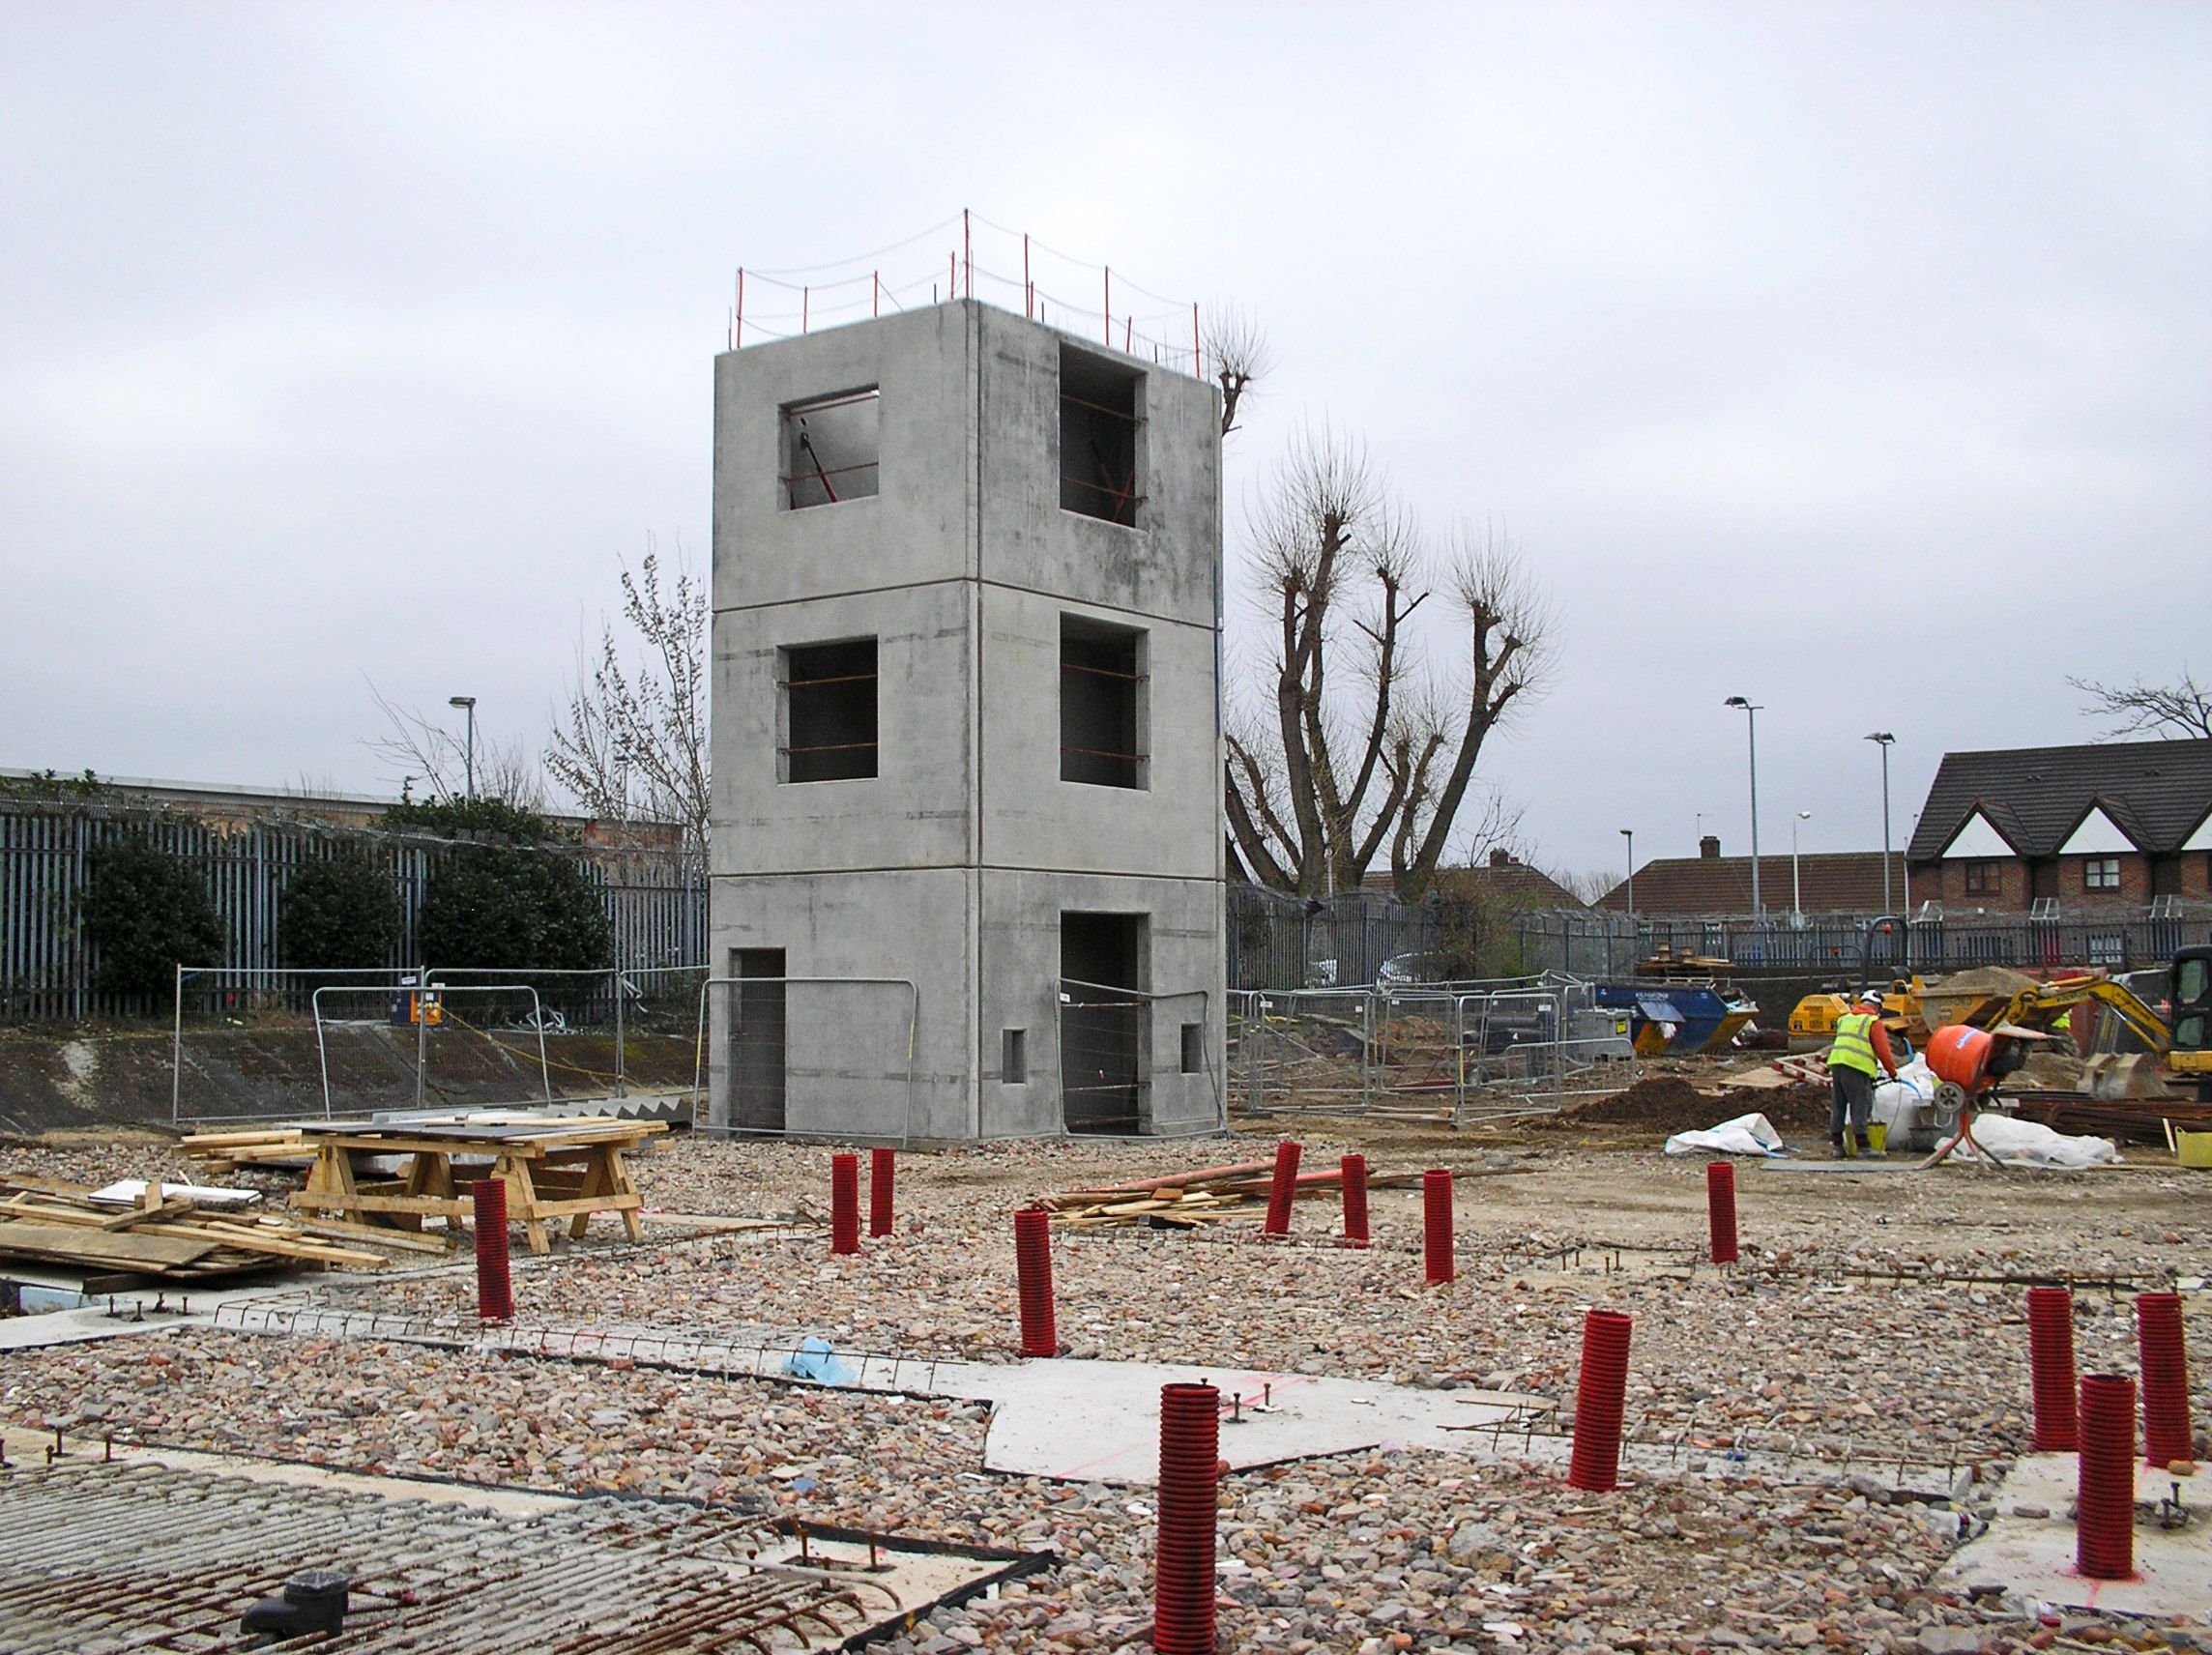 Precast concrete panels used for fire drill towers in London